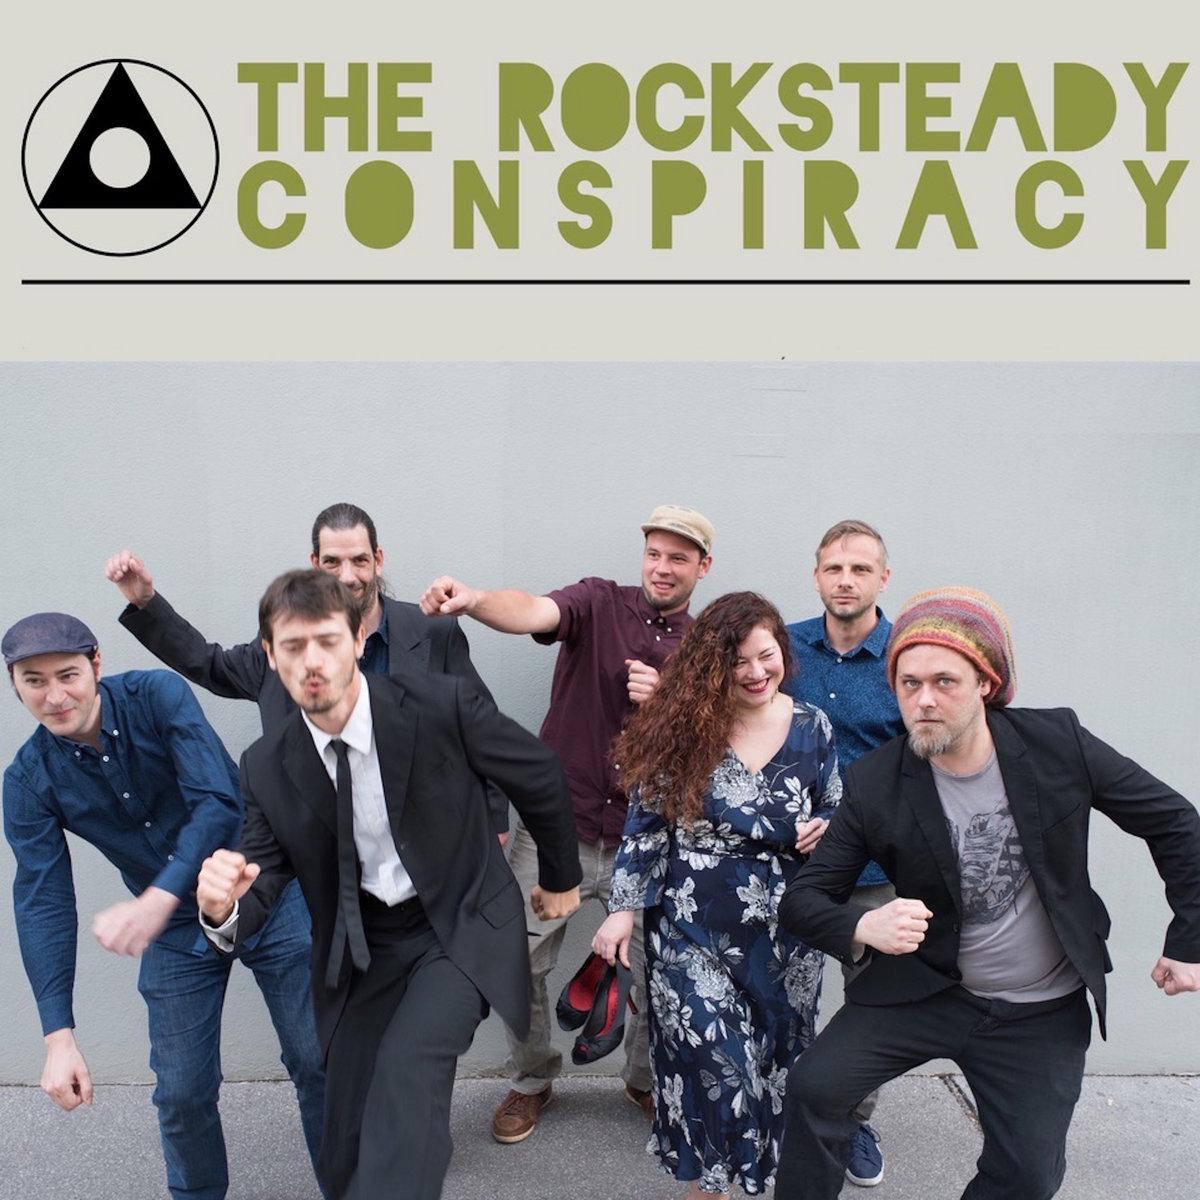 The Rocksteady Conspiracy